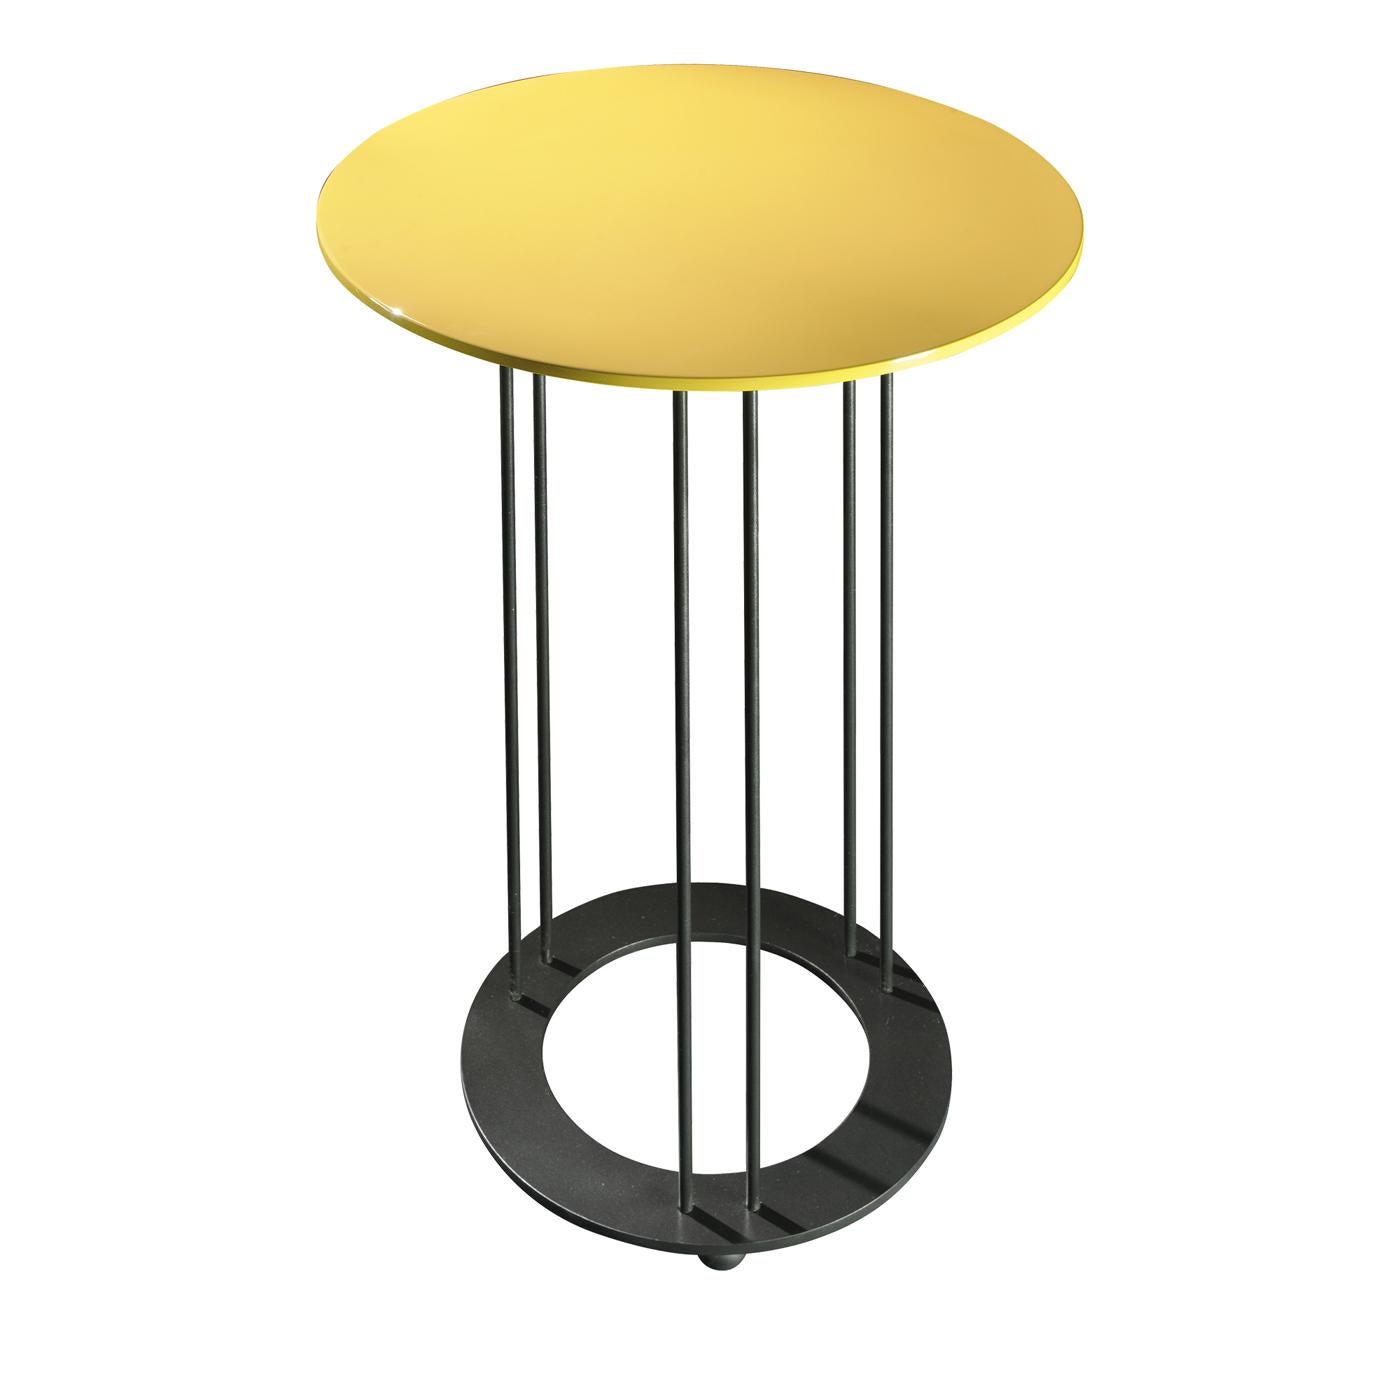 This tall coffee table will be a vivacious addition to a refined decor, enriching it with lively sophistication. Its structure is made of metal with a matte black finish and features three pairs of slim legs held together by a sturdy circular base.